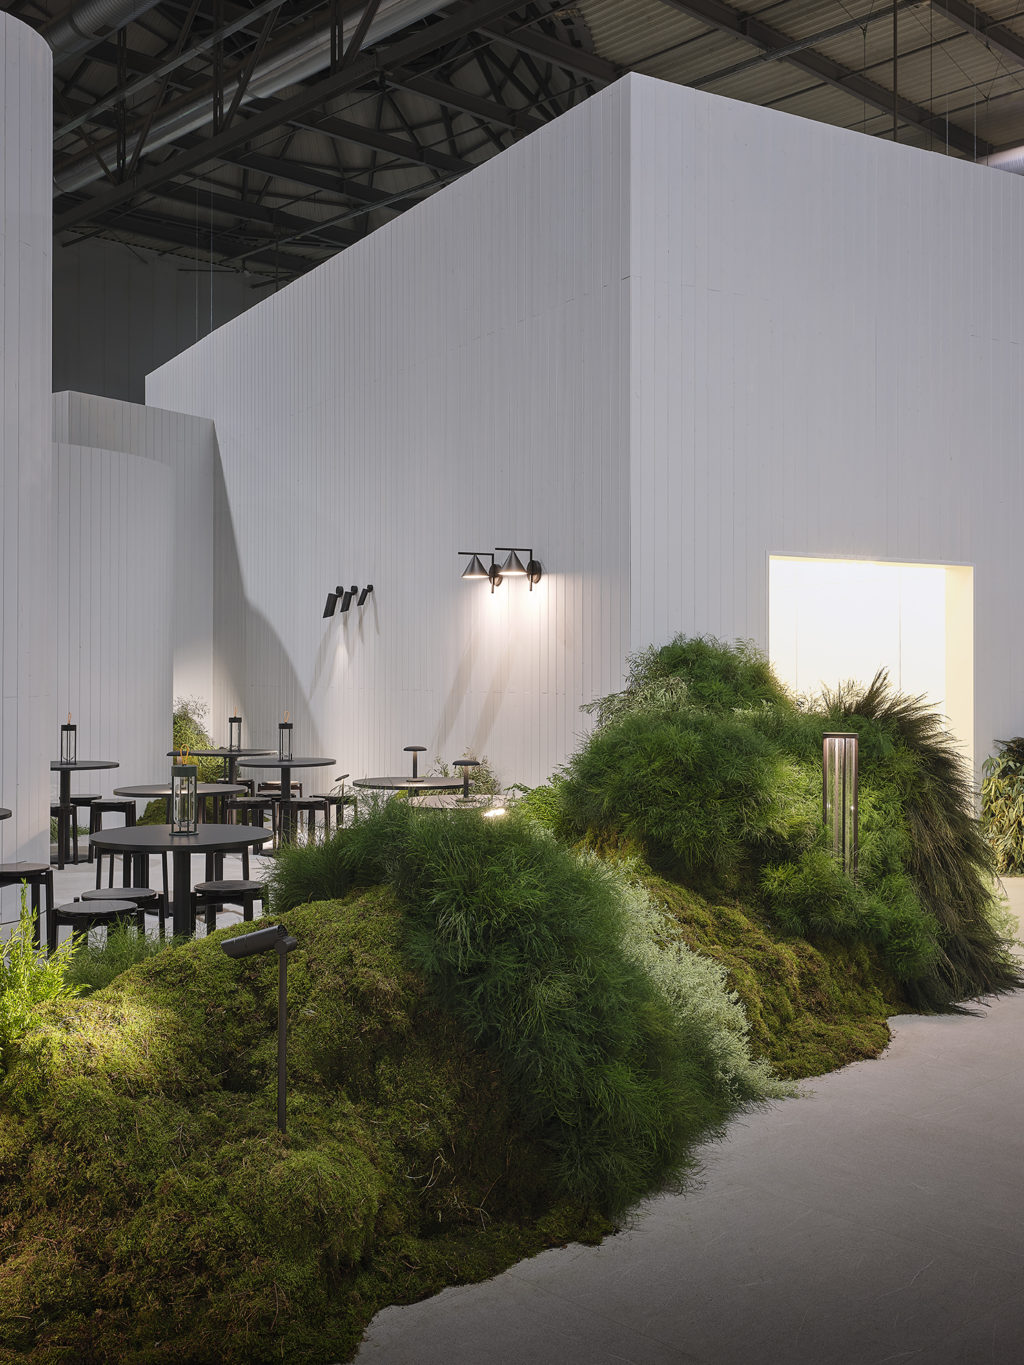 Flos MDW stand